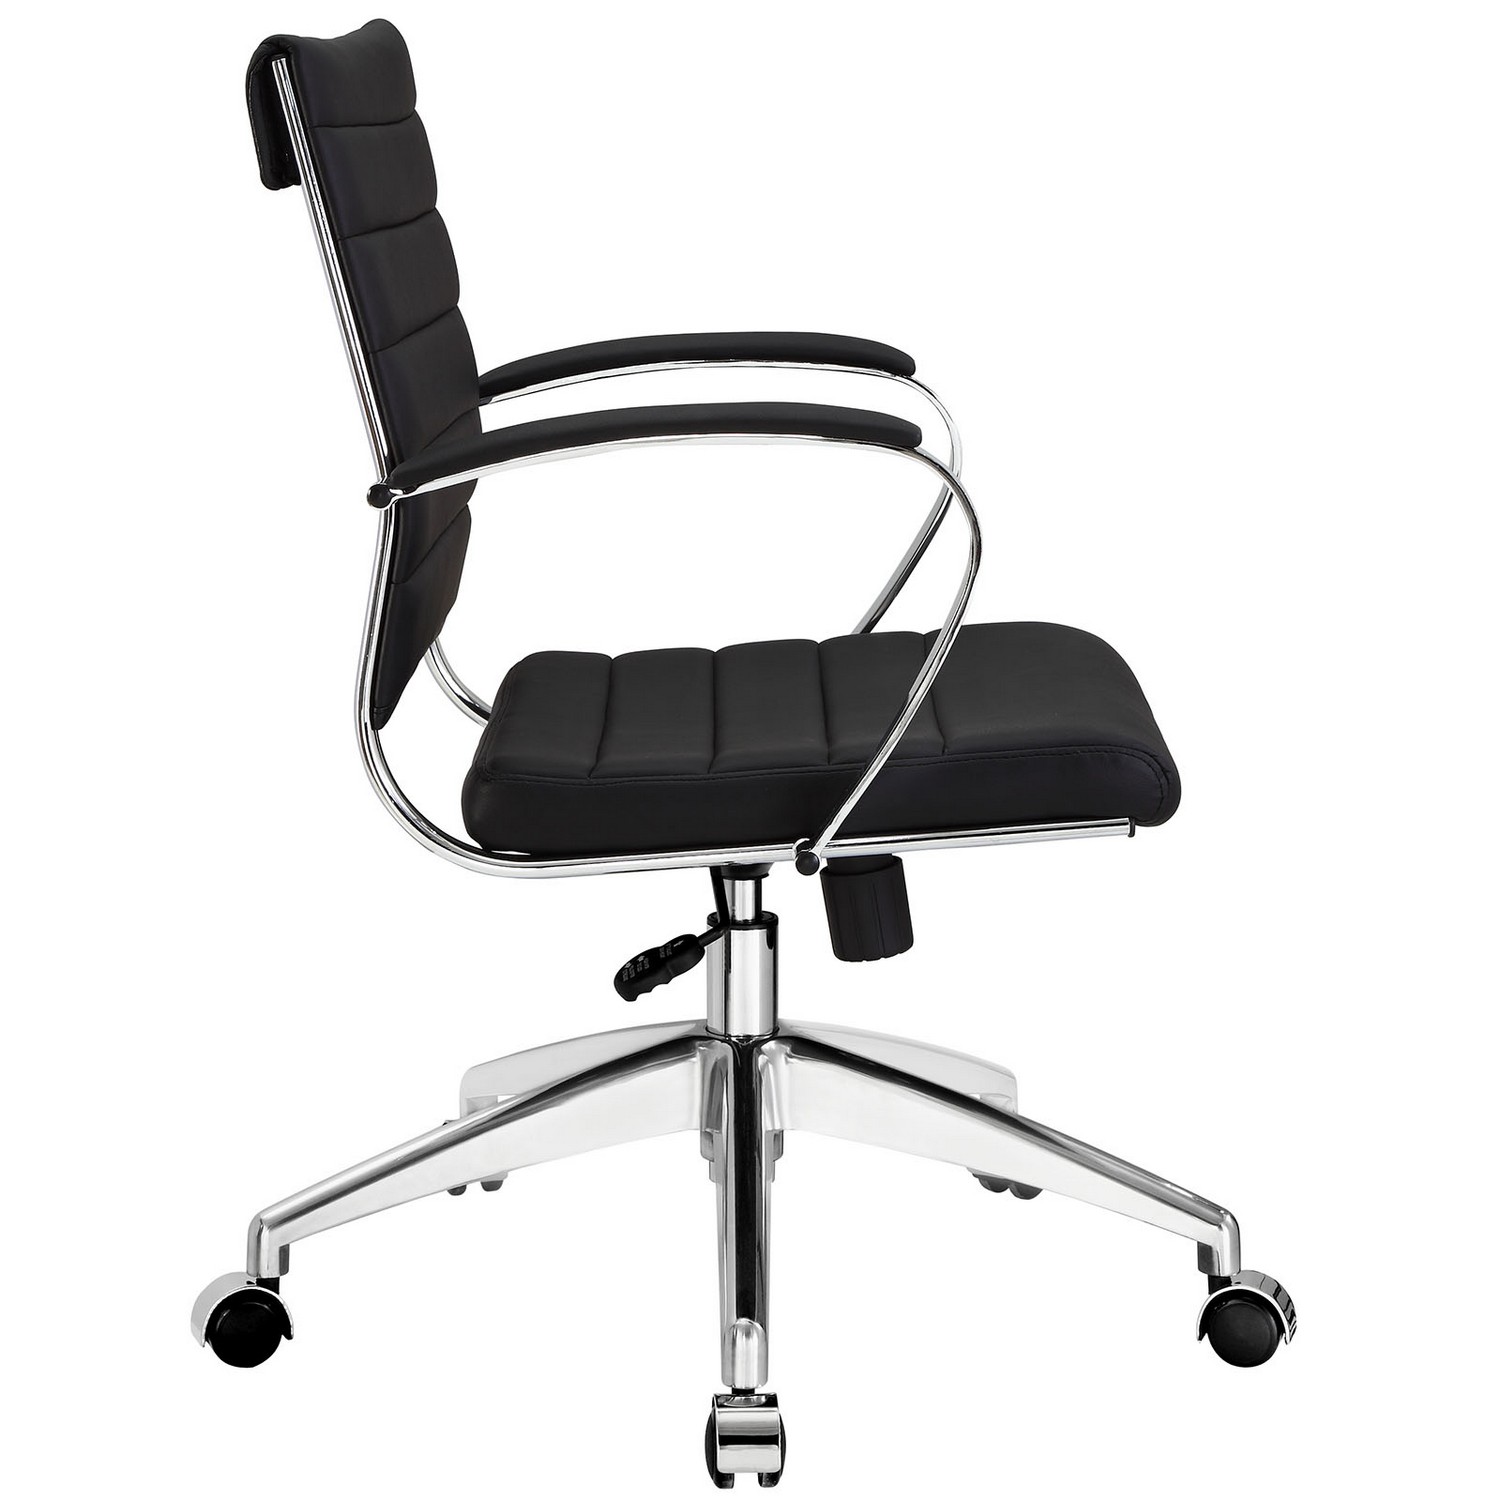 Modway Jive Mid Back Office Chair - Black